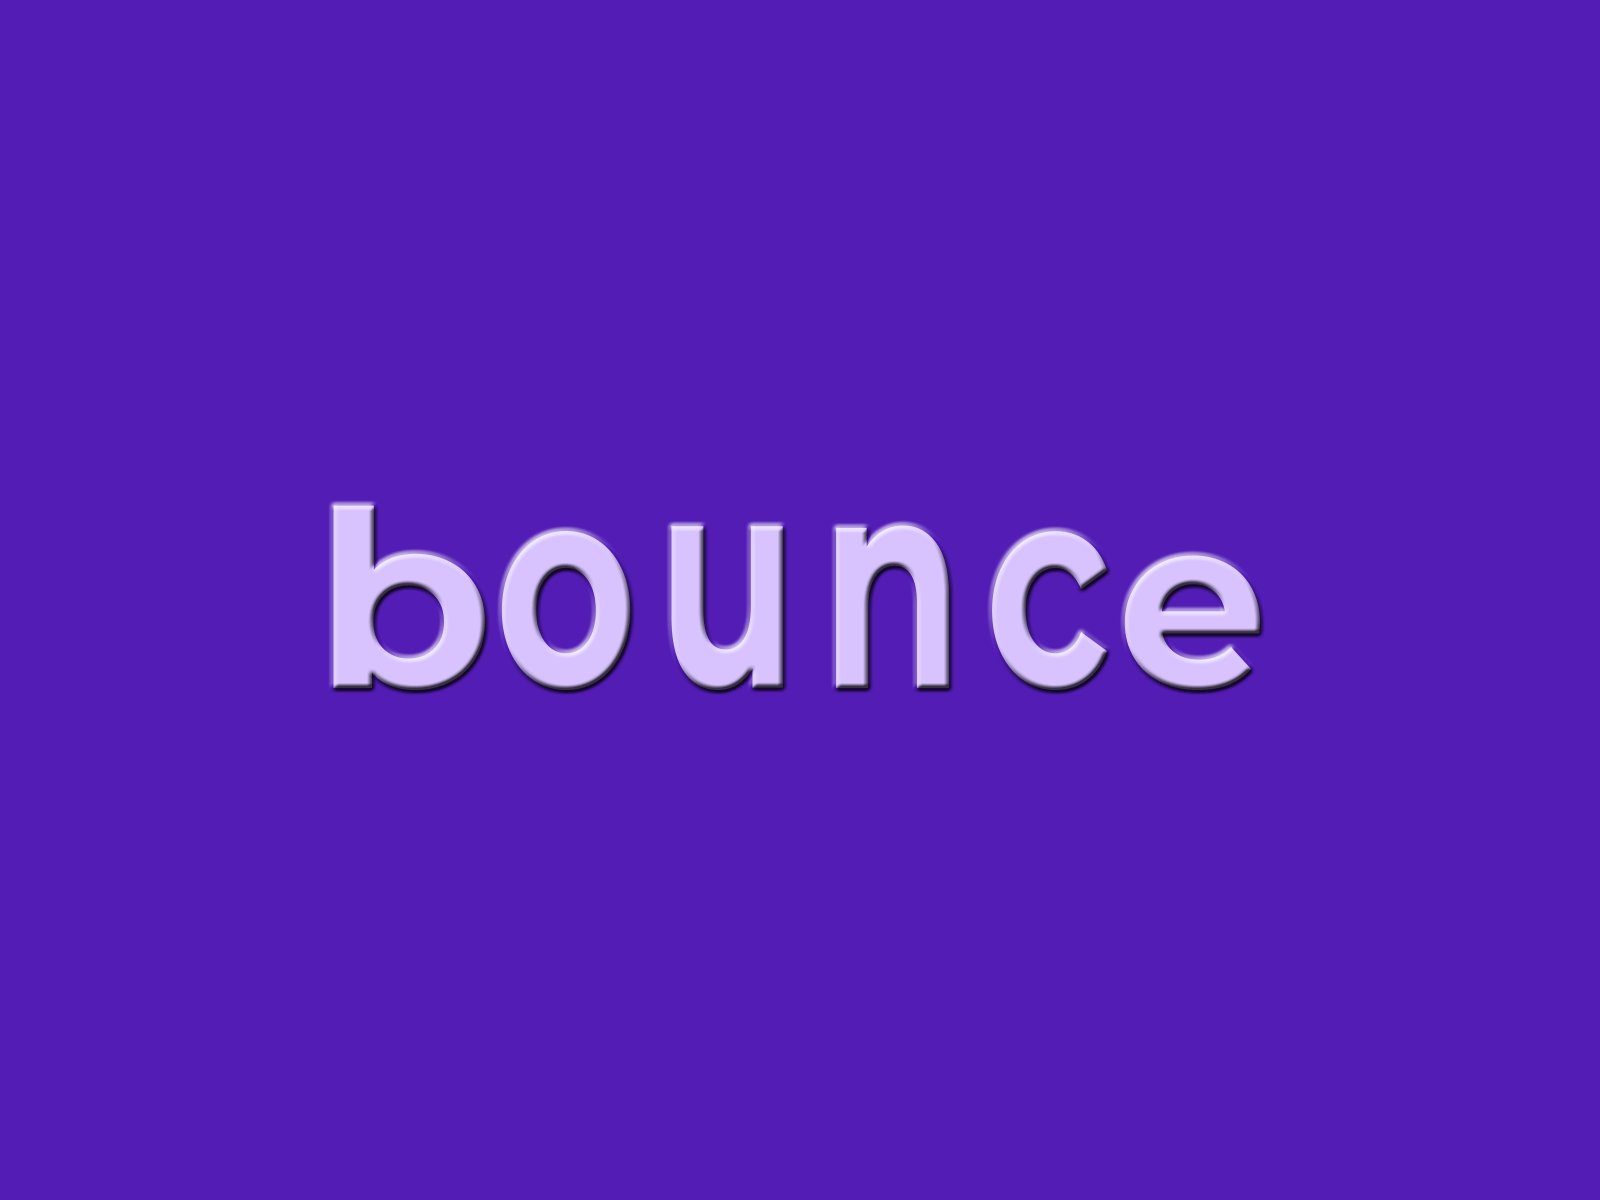 Bounce Logotype Animation after effects tutorial animation animation after effects bounce bounceanimation fancy fancyanimation graphic design insideofmotion logo logoanimation logotype logotypeanimation morphling motion design motion graphics simpleanimation tutorial type typography